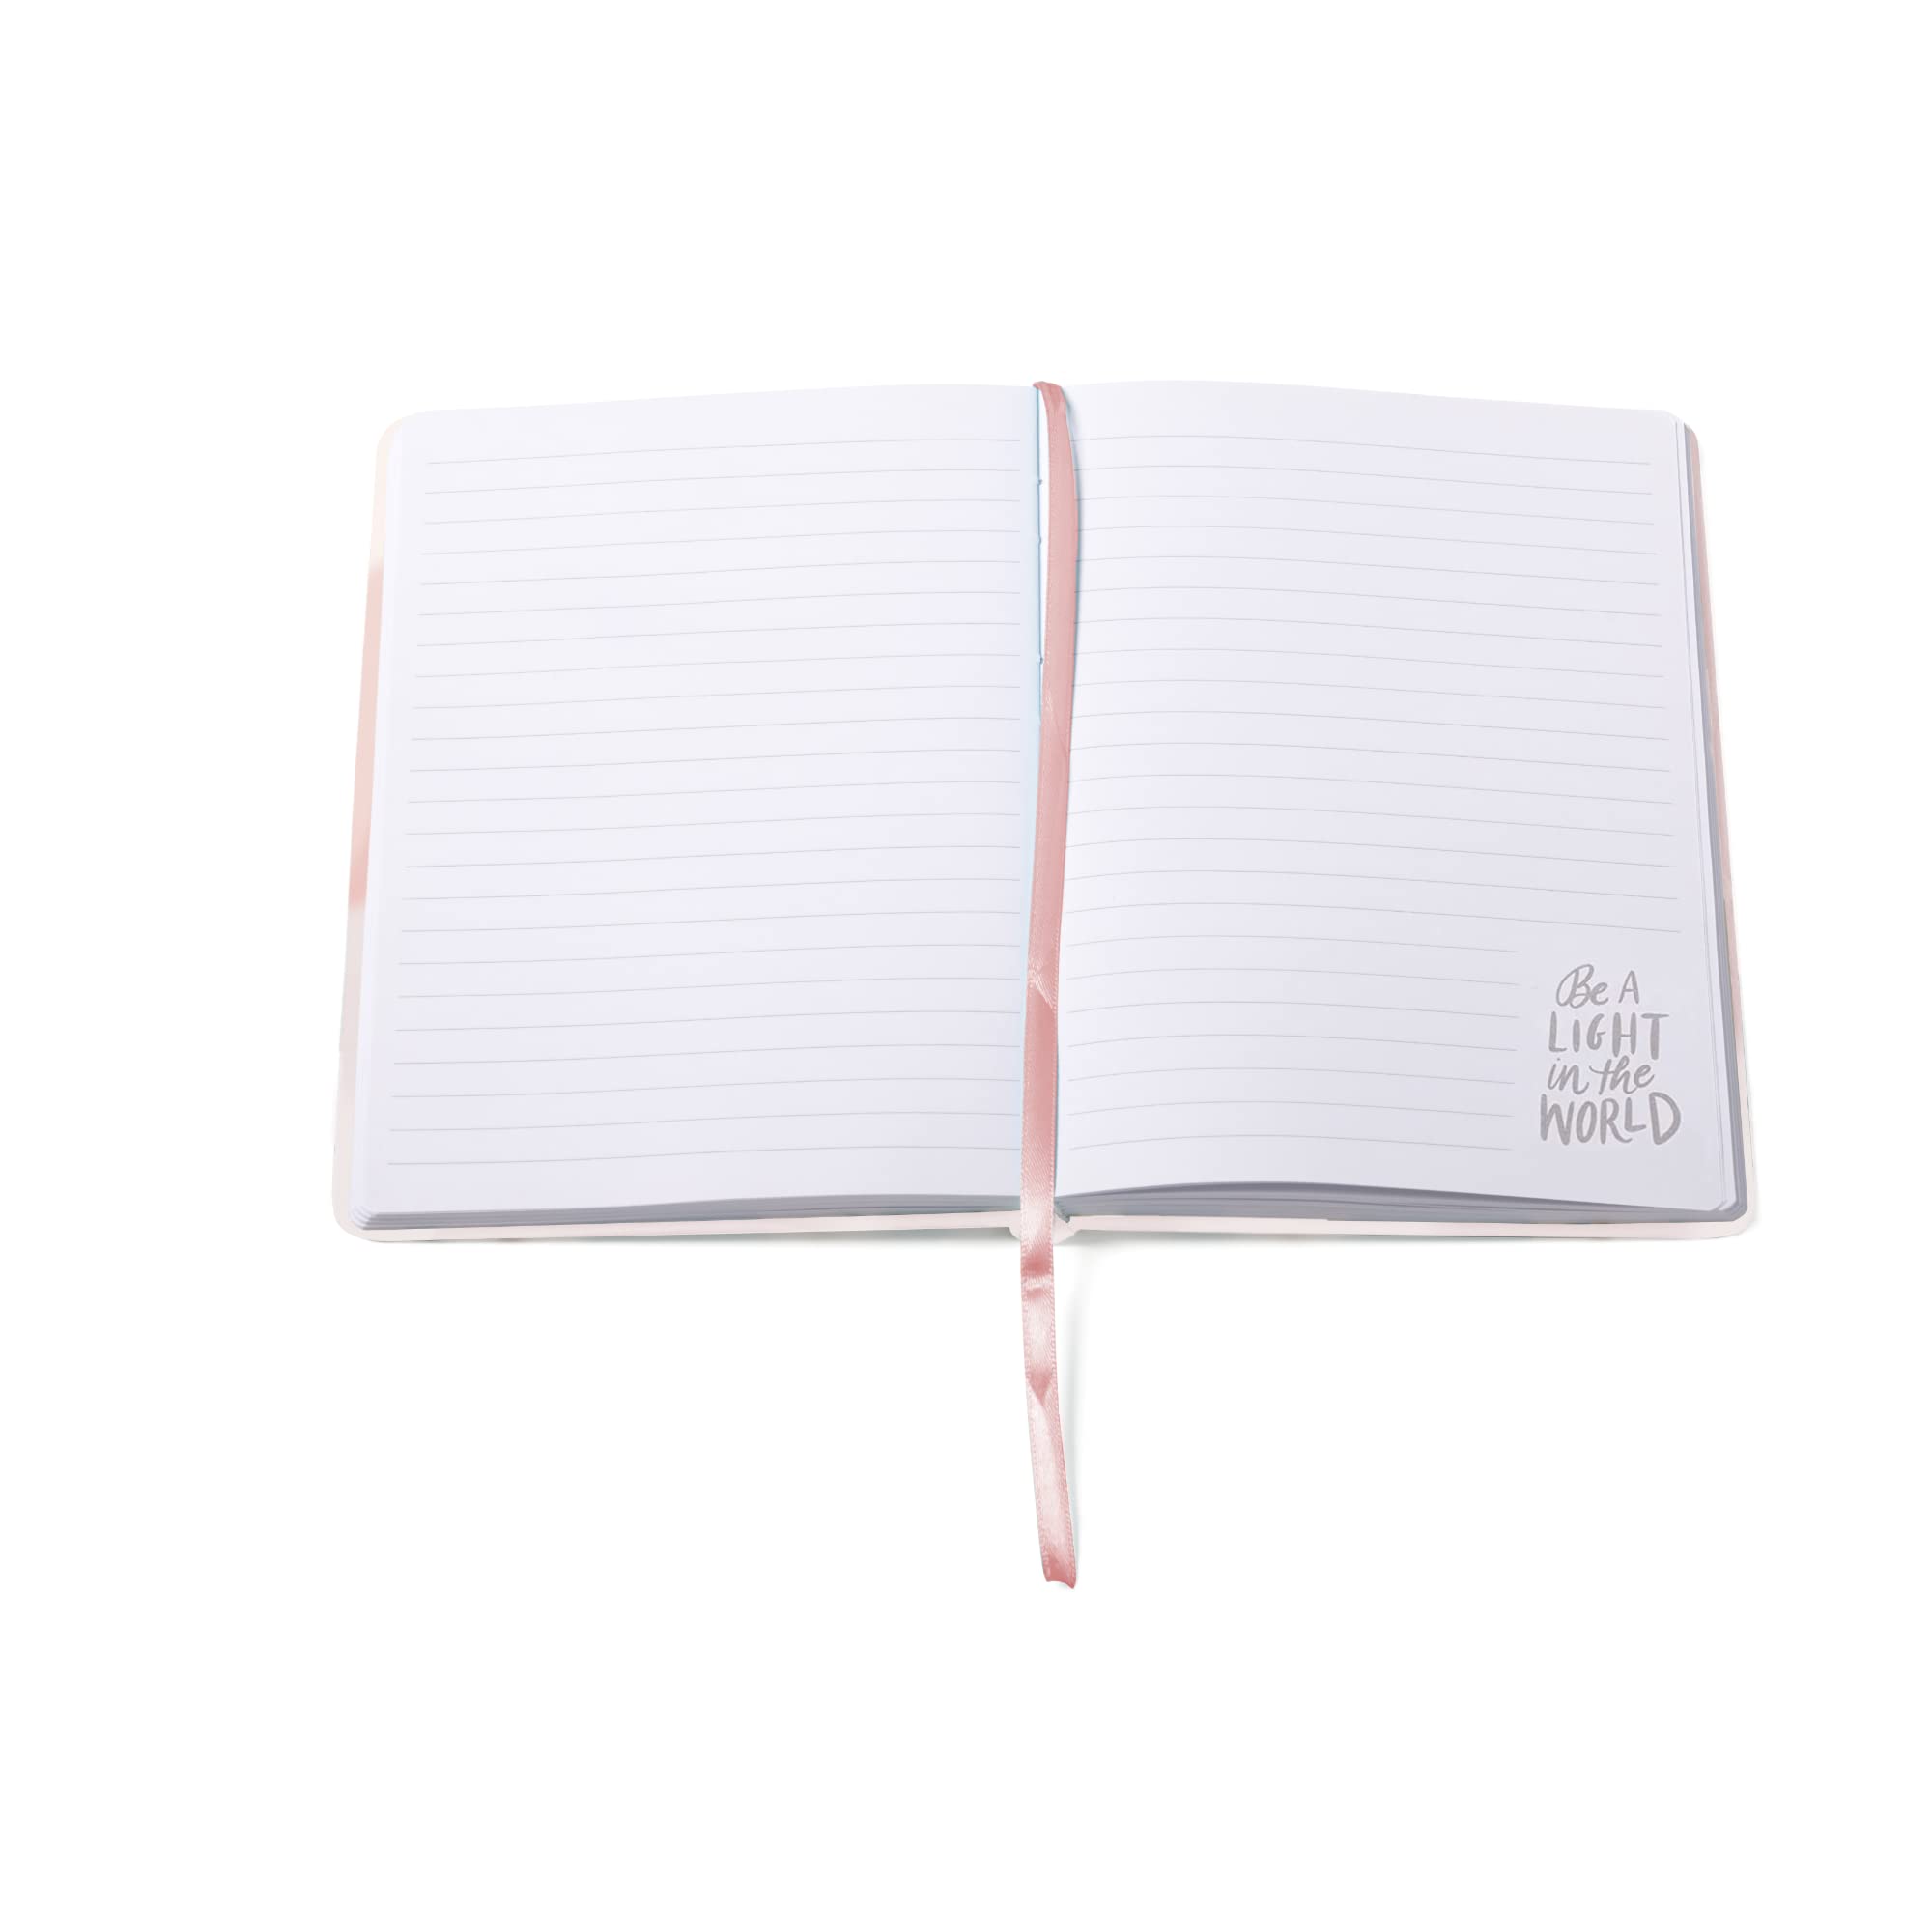 Premium Notebook Journal with Verses and Flexible Cover